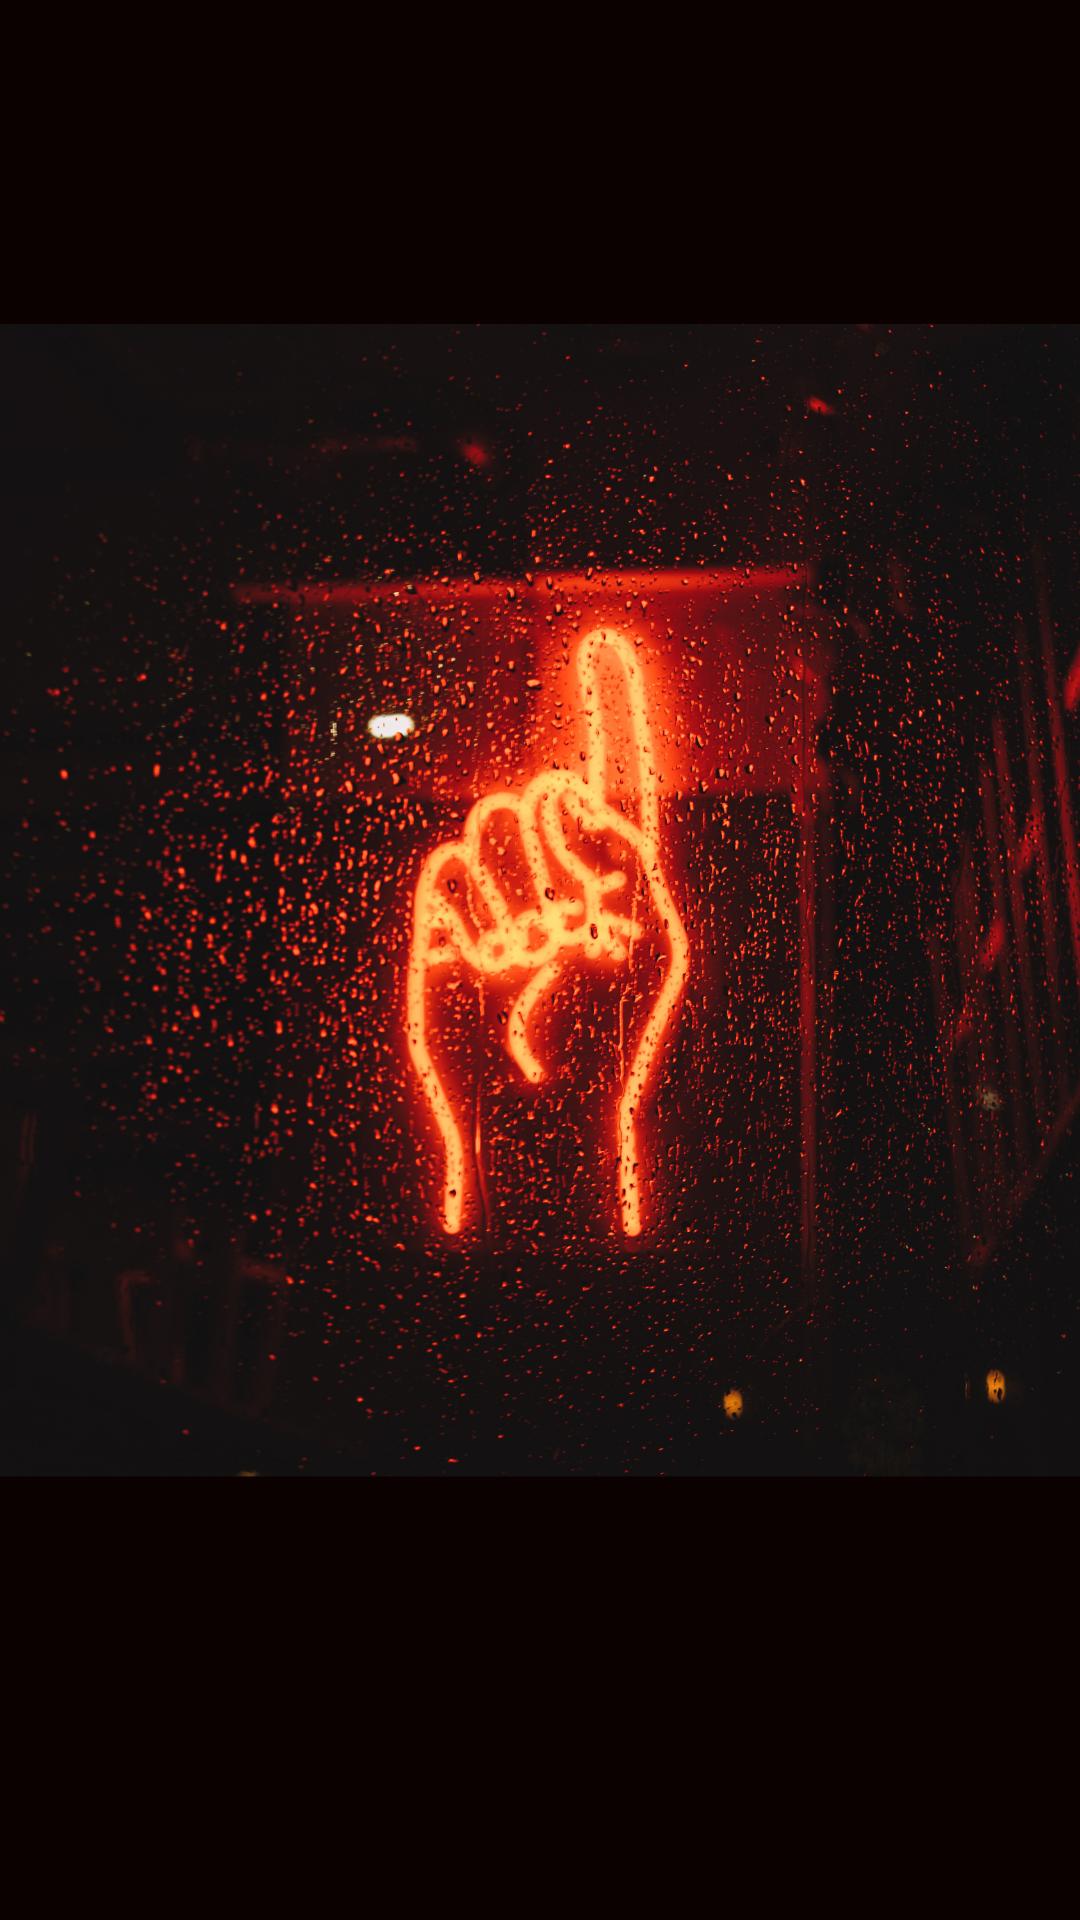 A neon sign that is lit up - Neon red